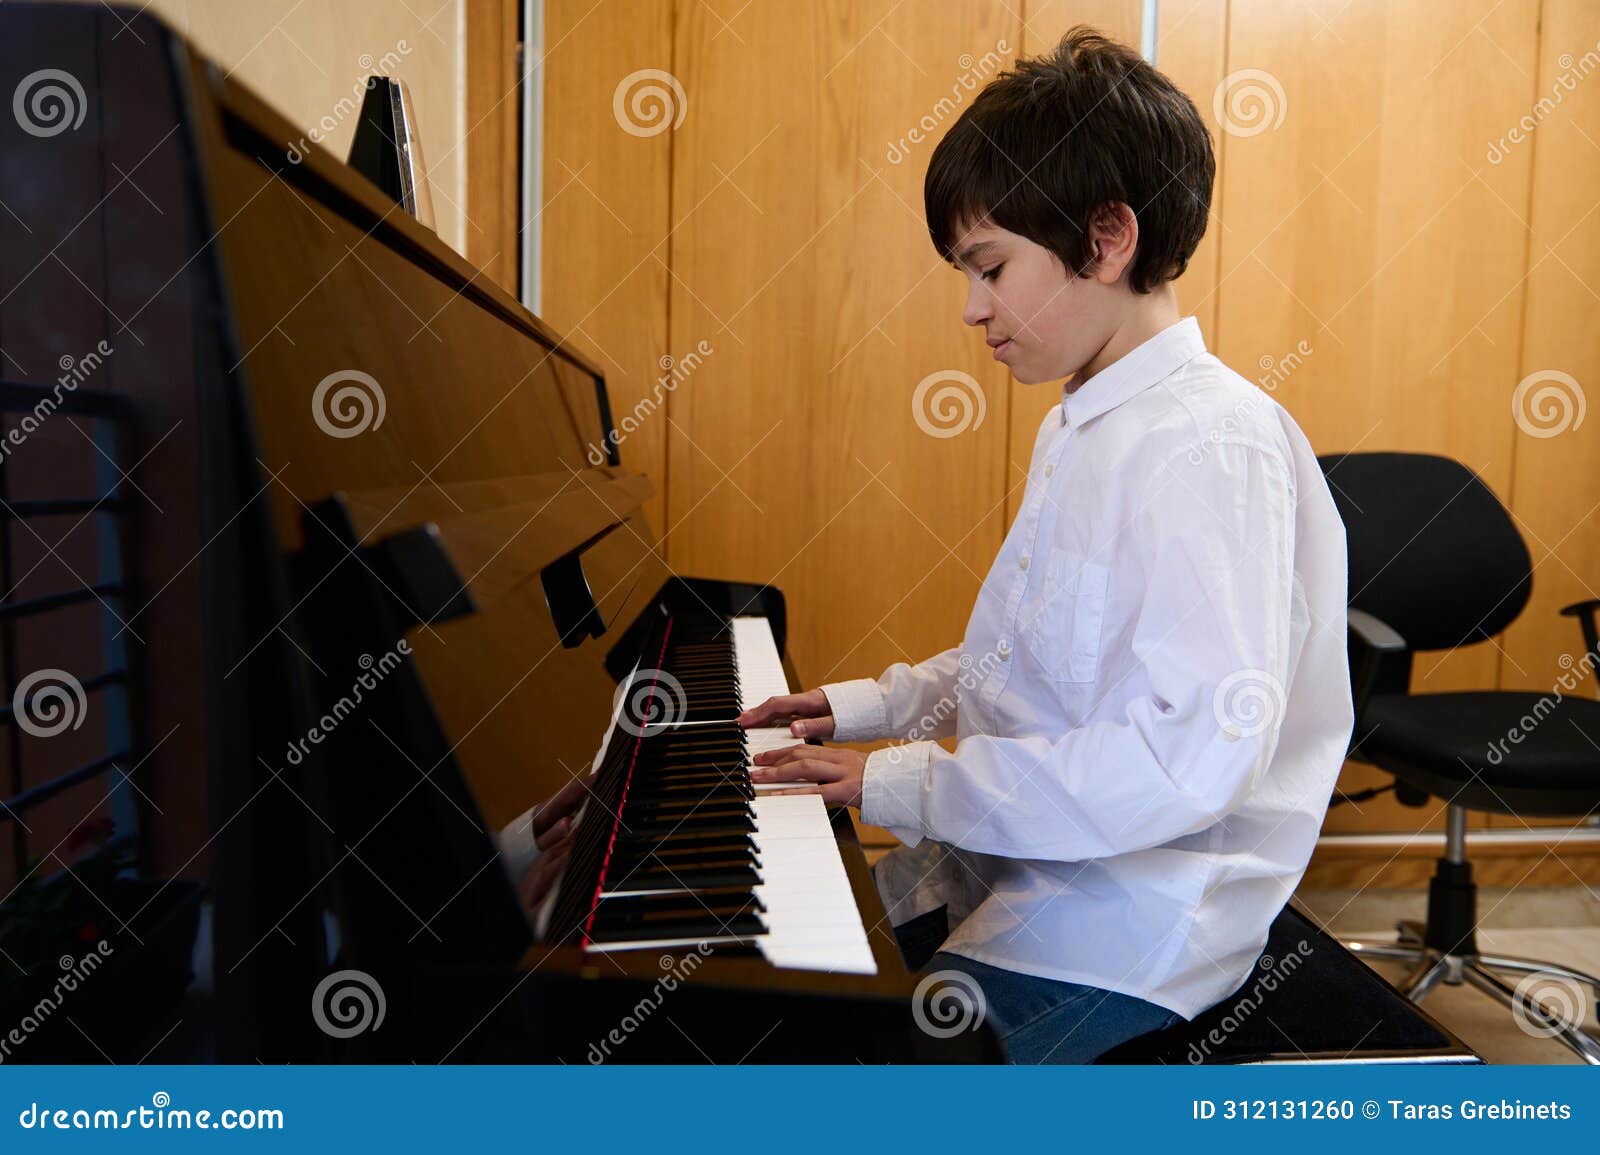 talented teenage musician creates music and song, performs on the pianoforte, composes a melody